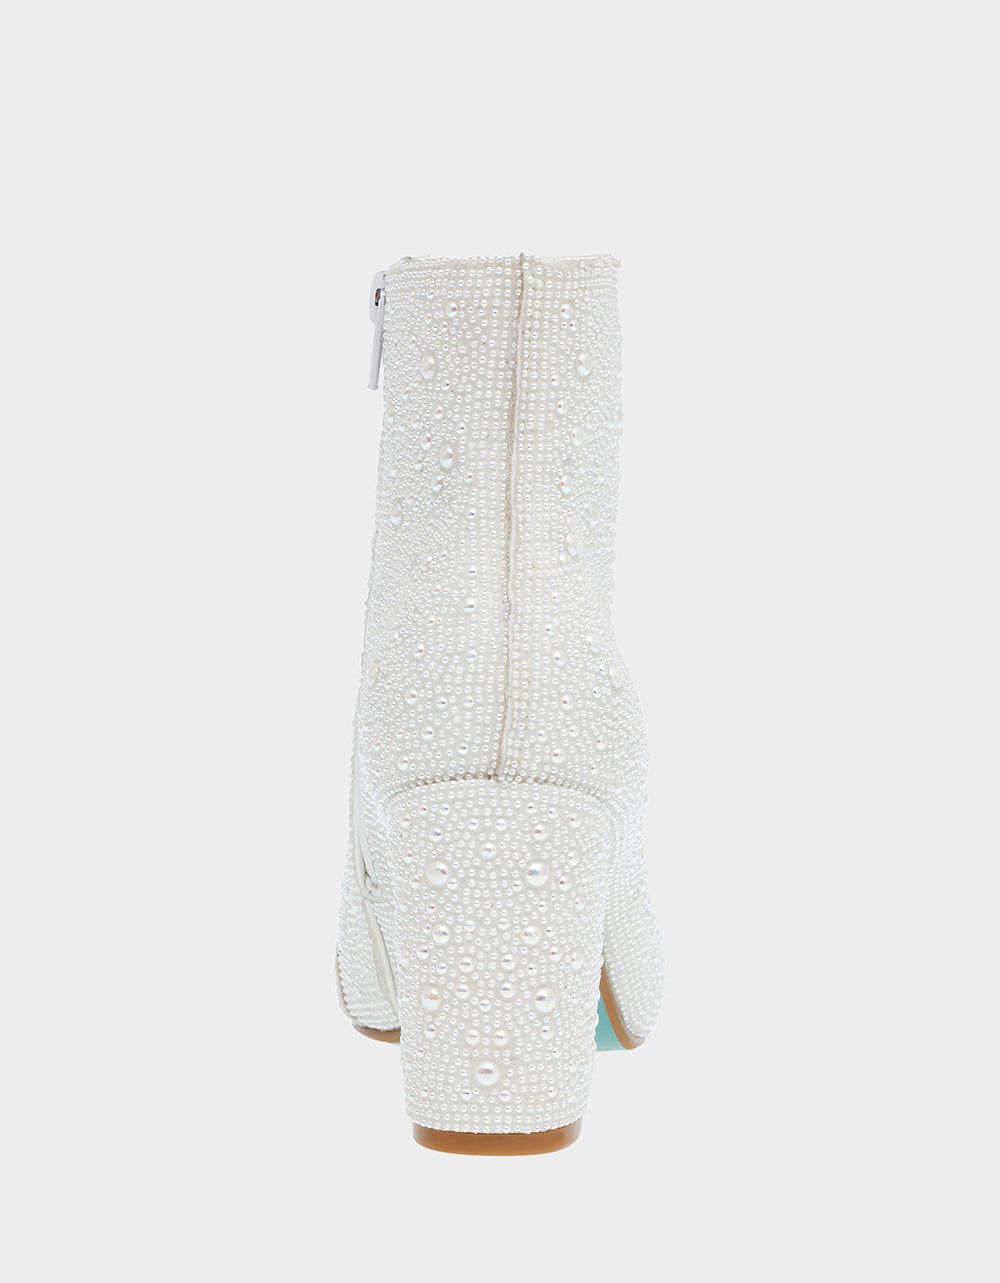 CADY IVORY Pearl Bootie | Pearl Rhinestone Booties | Women’s Boots ...